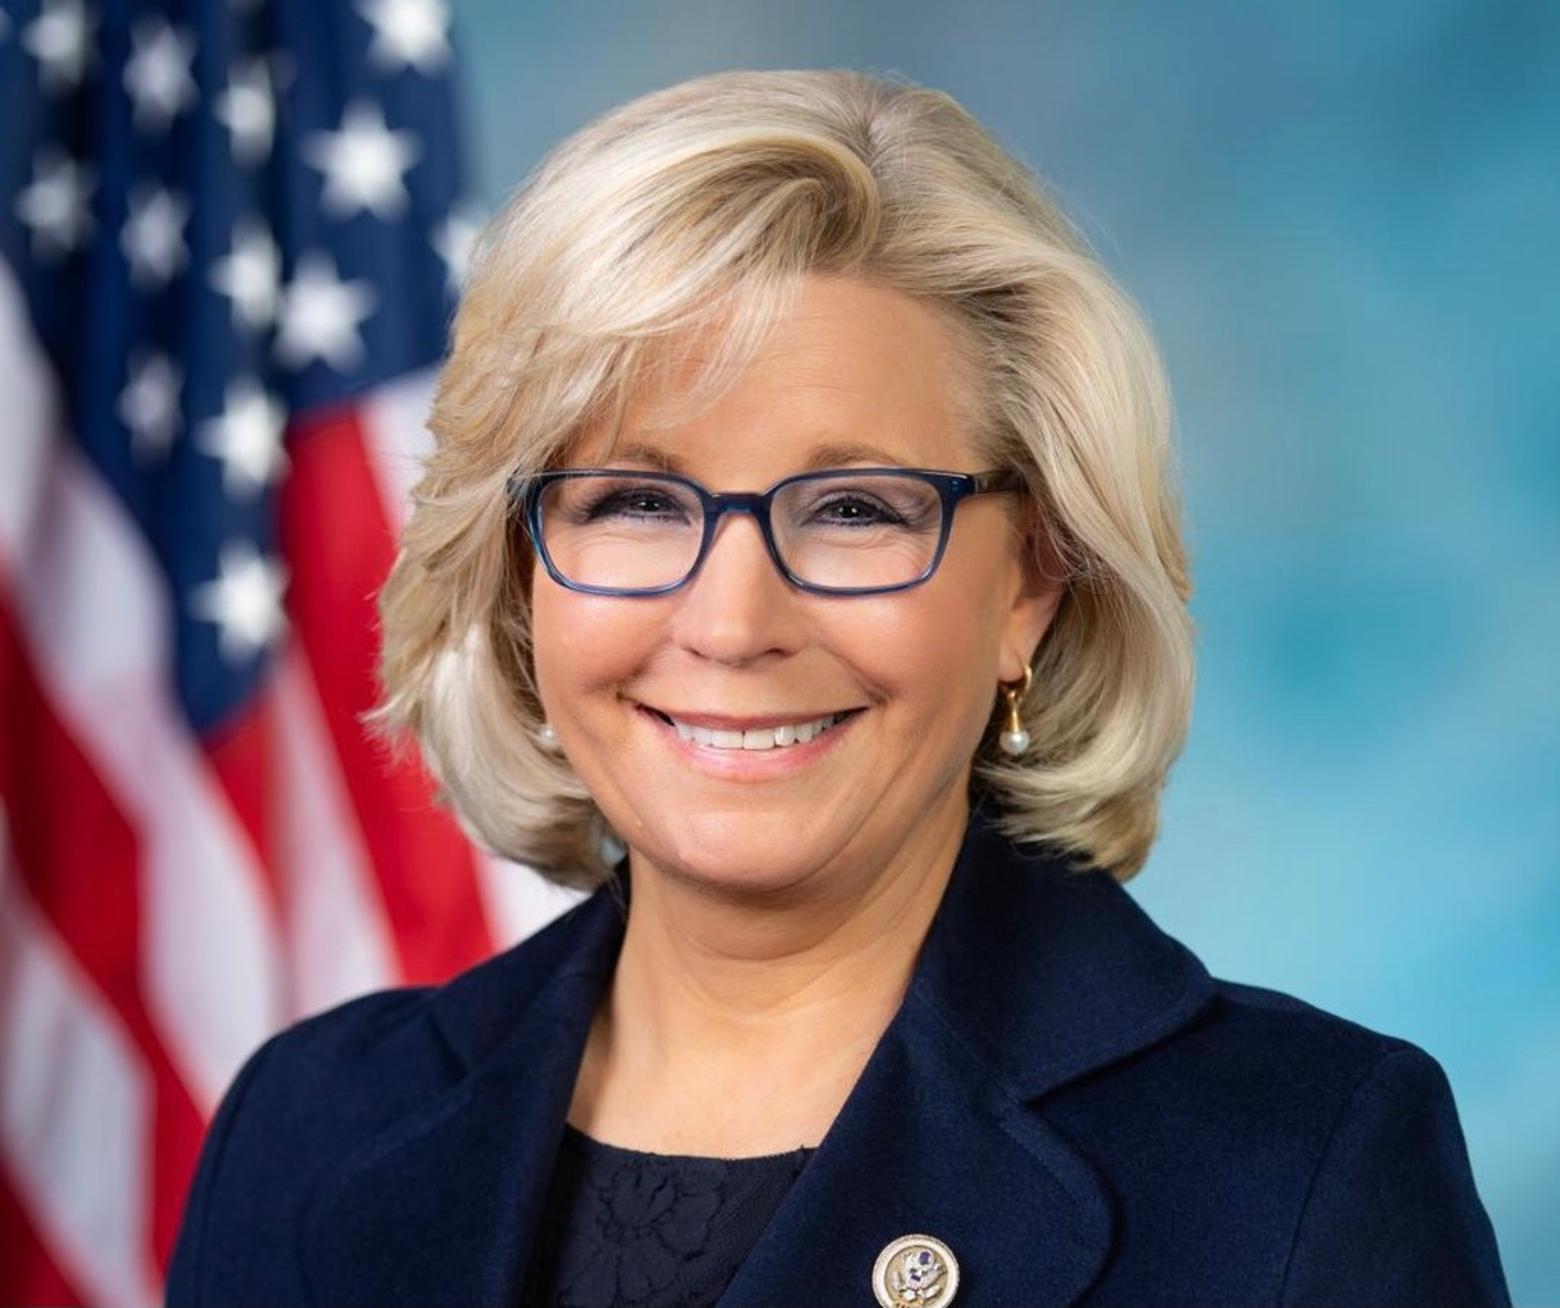 Congresswoman Liz Cheney of Wyoming,  a part-time resident of Jackson Hole, who has risked everything by taking on radical factions in her own party. The survival of her political career in Wyoming, many says, has huge implications for the survival of America as we know it. Photo courtesy Liz Cheney